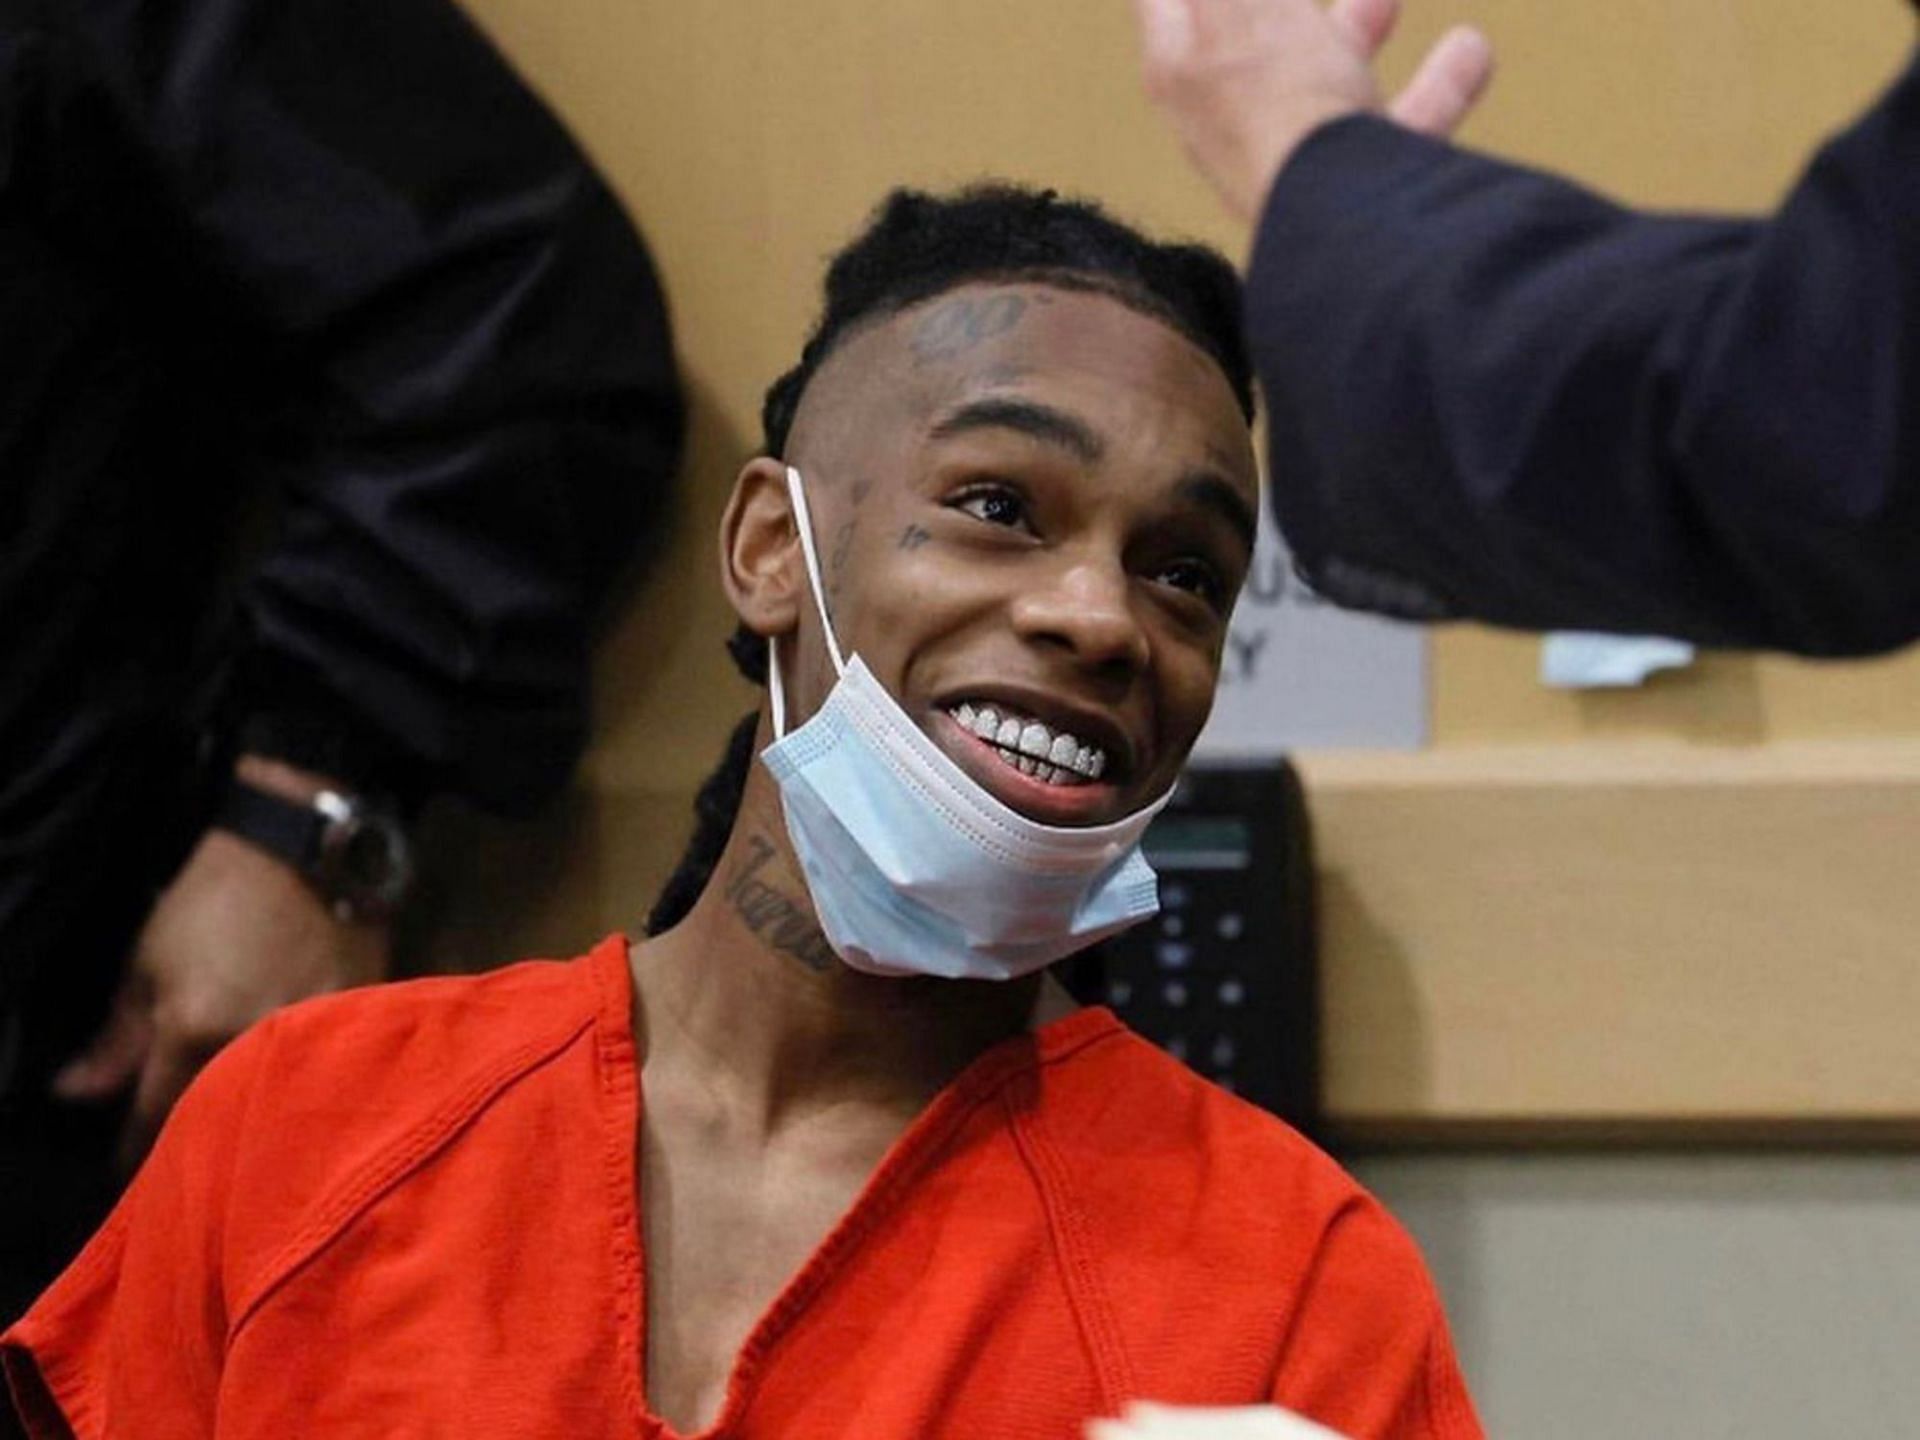 Imprisoned rapper YNW Melly to face death penalty if proven guilty (Image via Sun Sentinel)